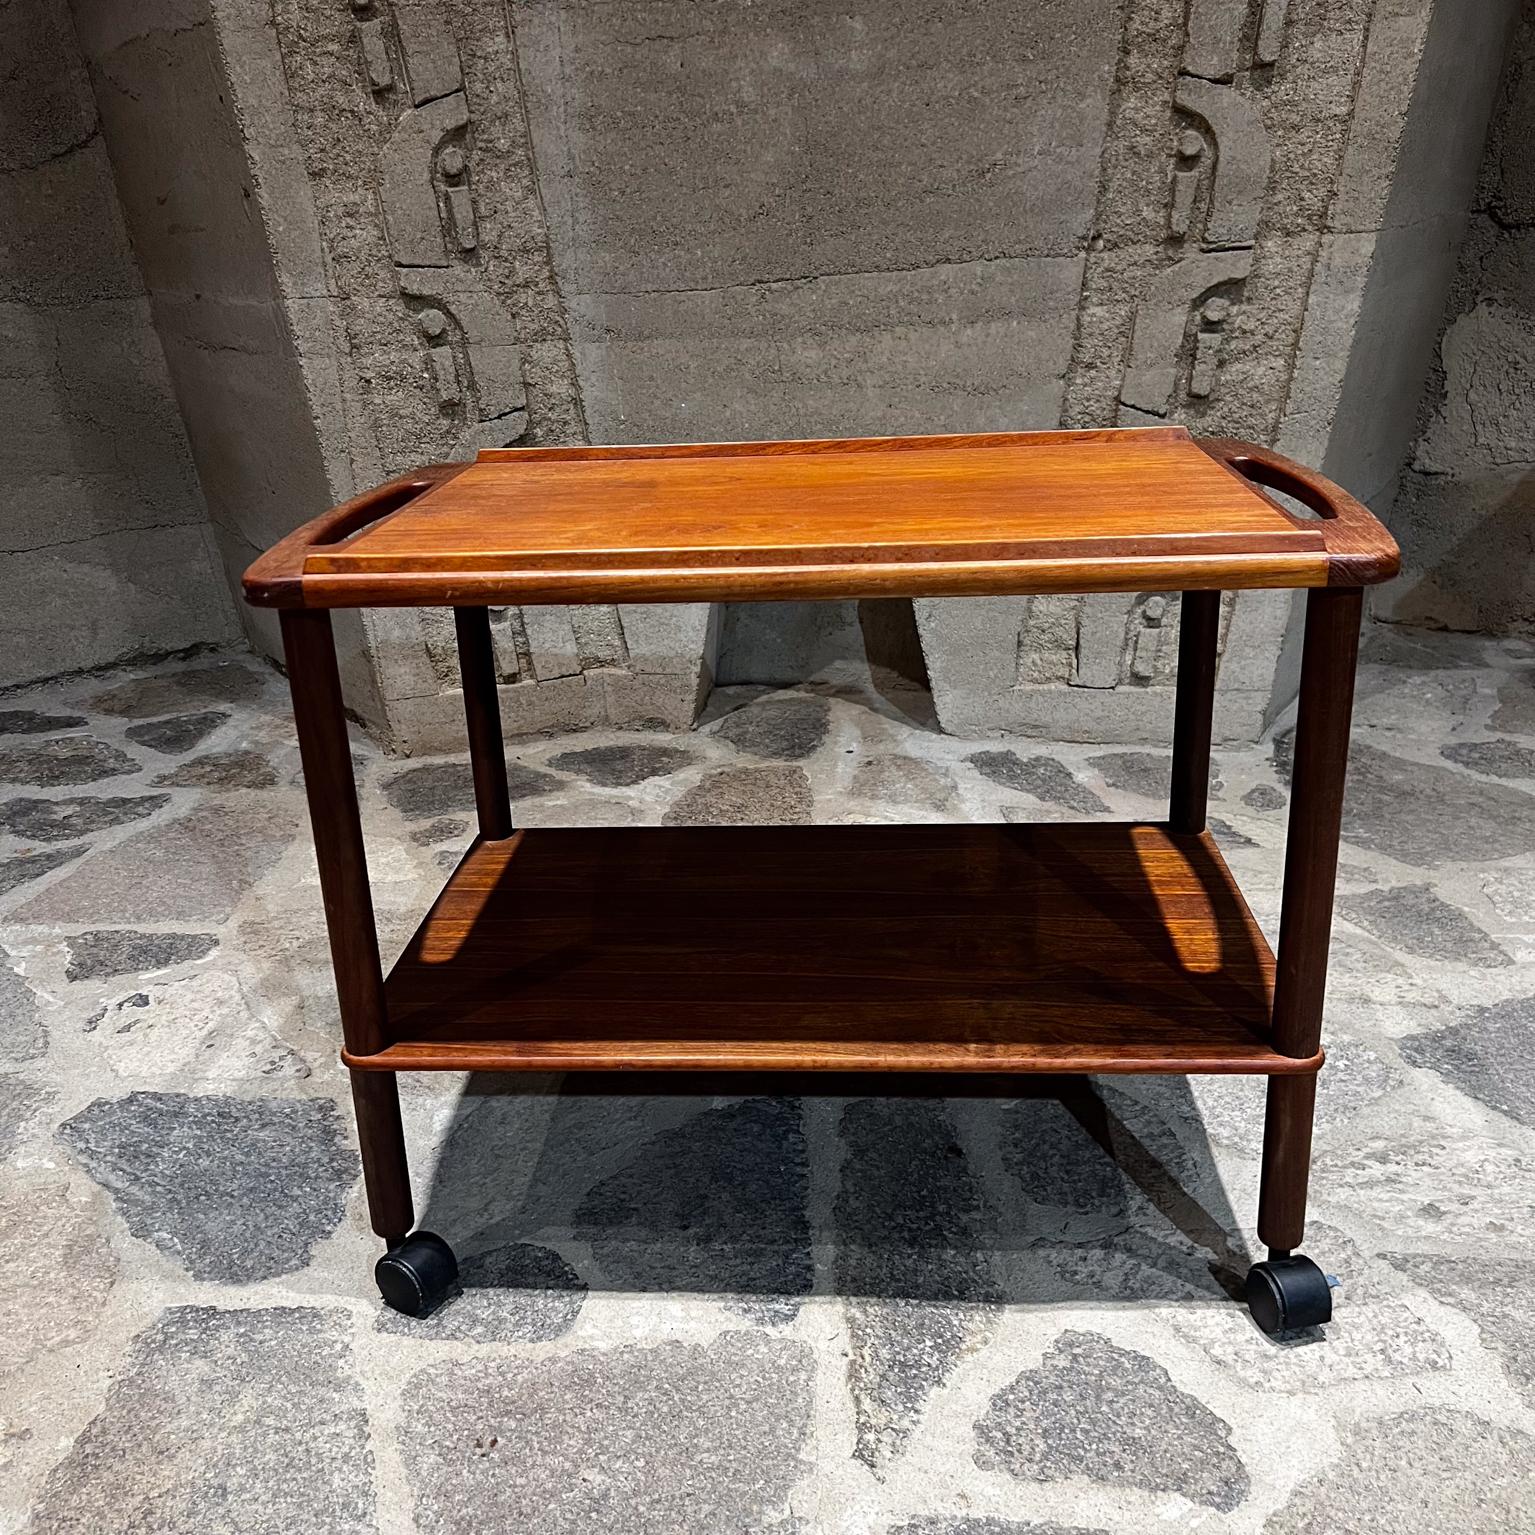 1960s Danish Modern Teak Service Cart Sculptural Handles
Rolling table service
29 d x 17.75 w x 22.5 h lower tier 8.13 h
Preowned original unrestored vintage condition
Refer to images provided.
Delivery to LA OC Palm Springs
